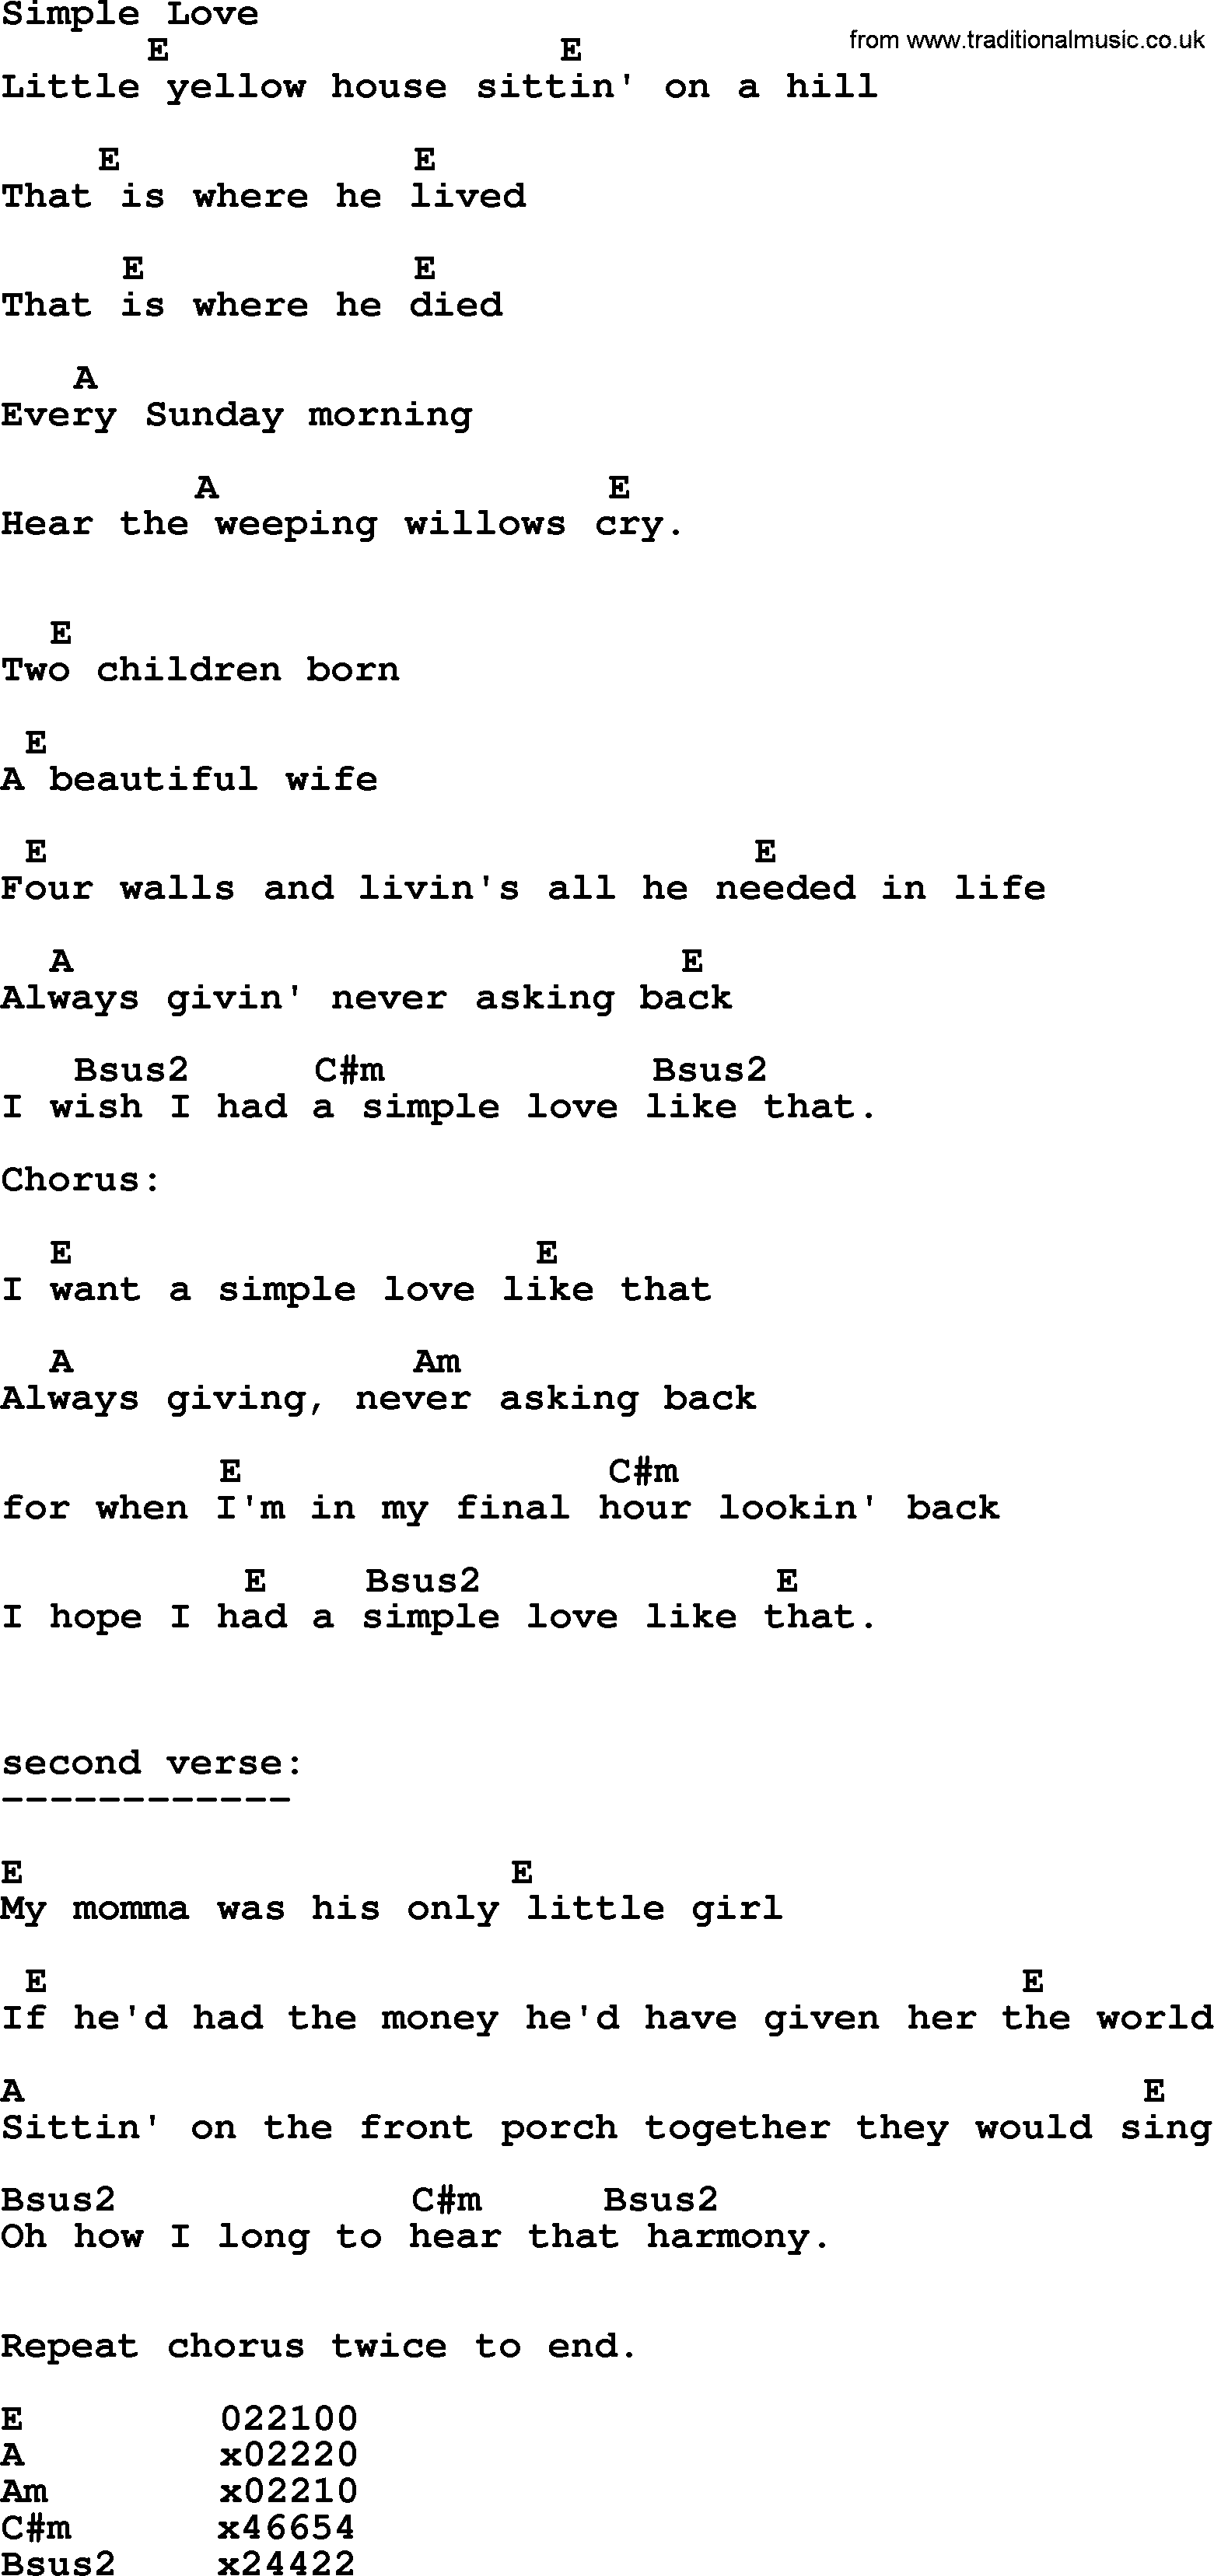 Bluegrass song: Simple Love, lyrics and chords